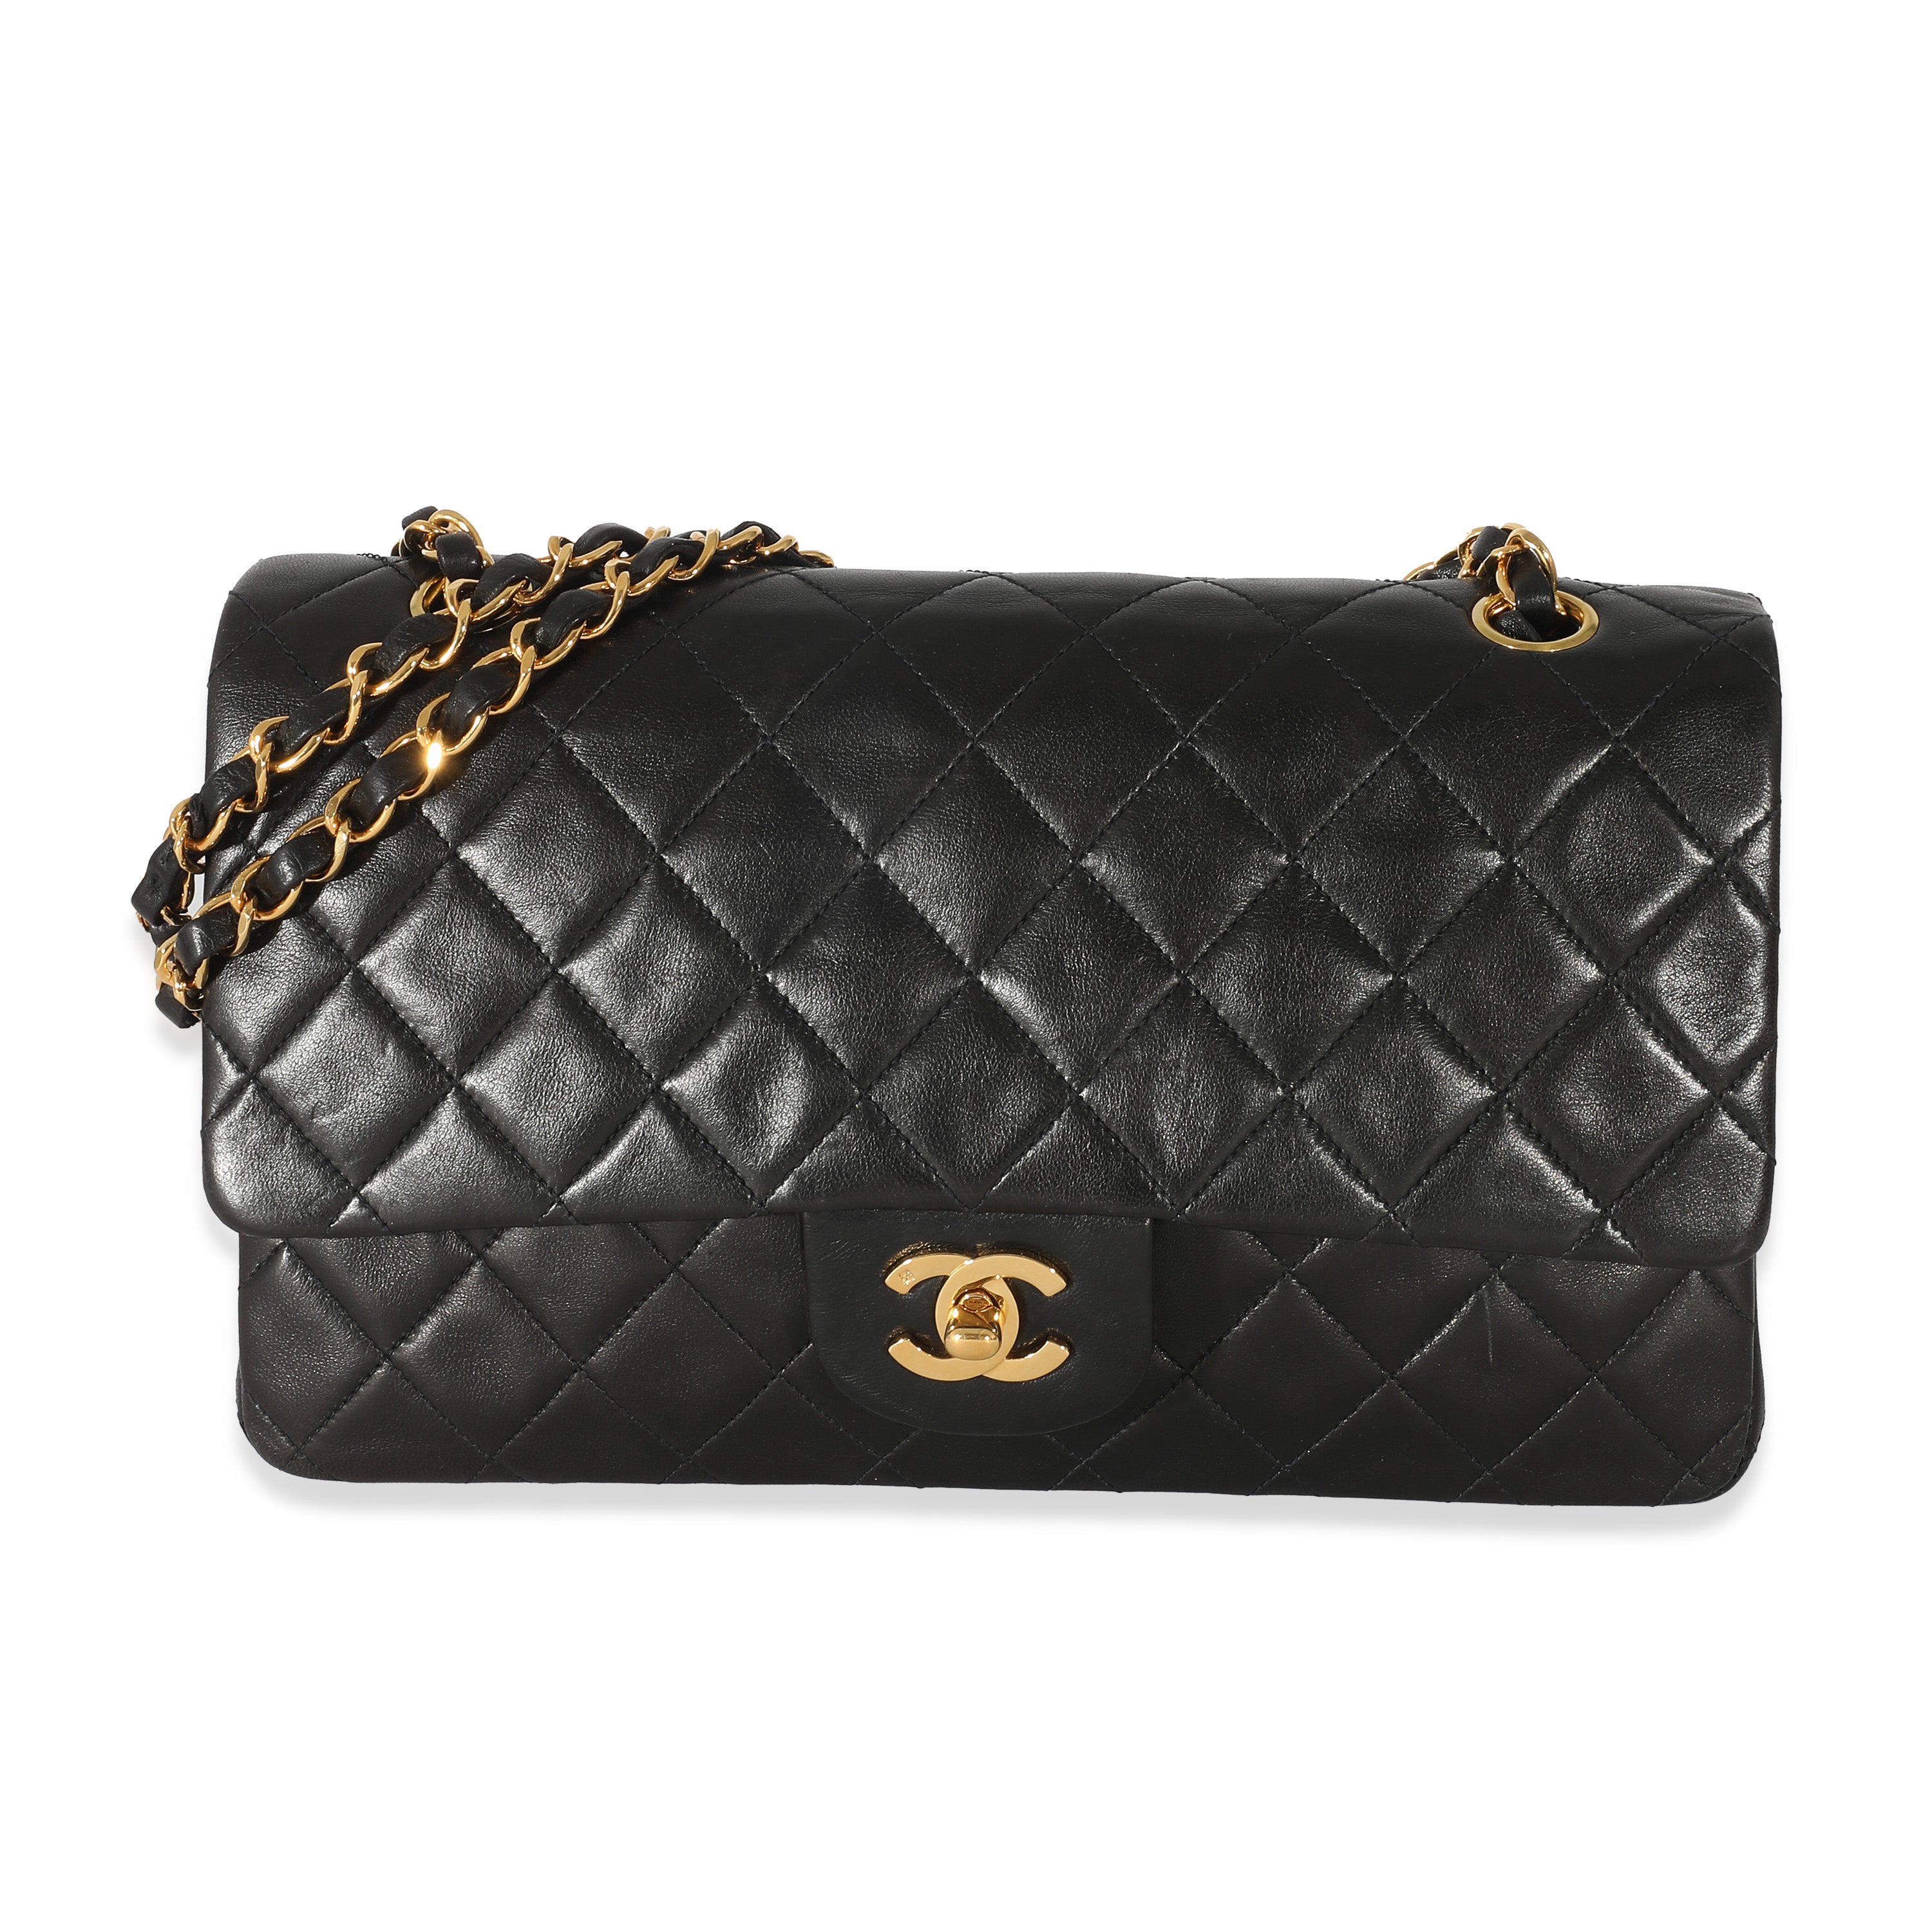 Chanel Pink Metallic Single Flap Shoulder Bag in Lambskin Leather with Gold  and Precious Stone Hardware Chanel